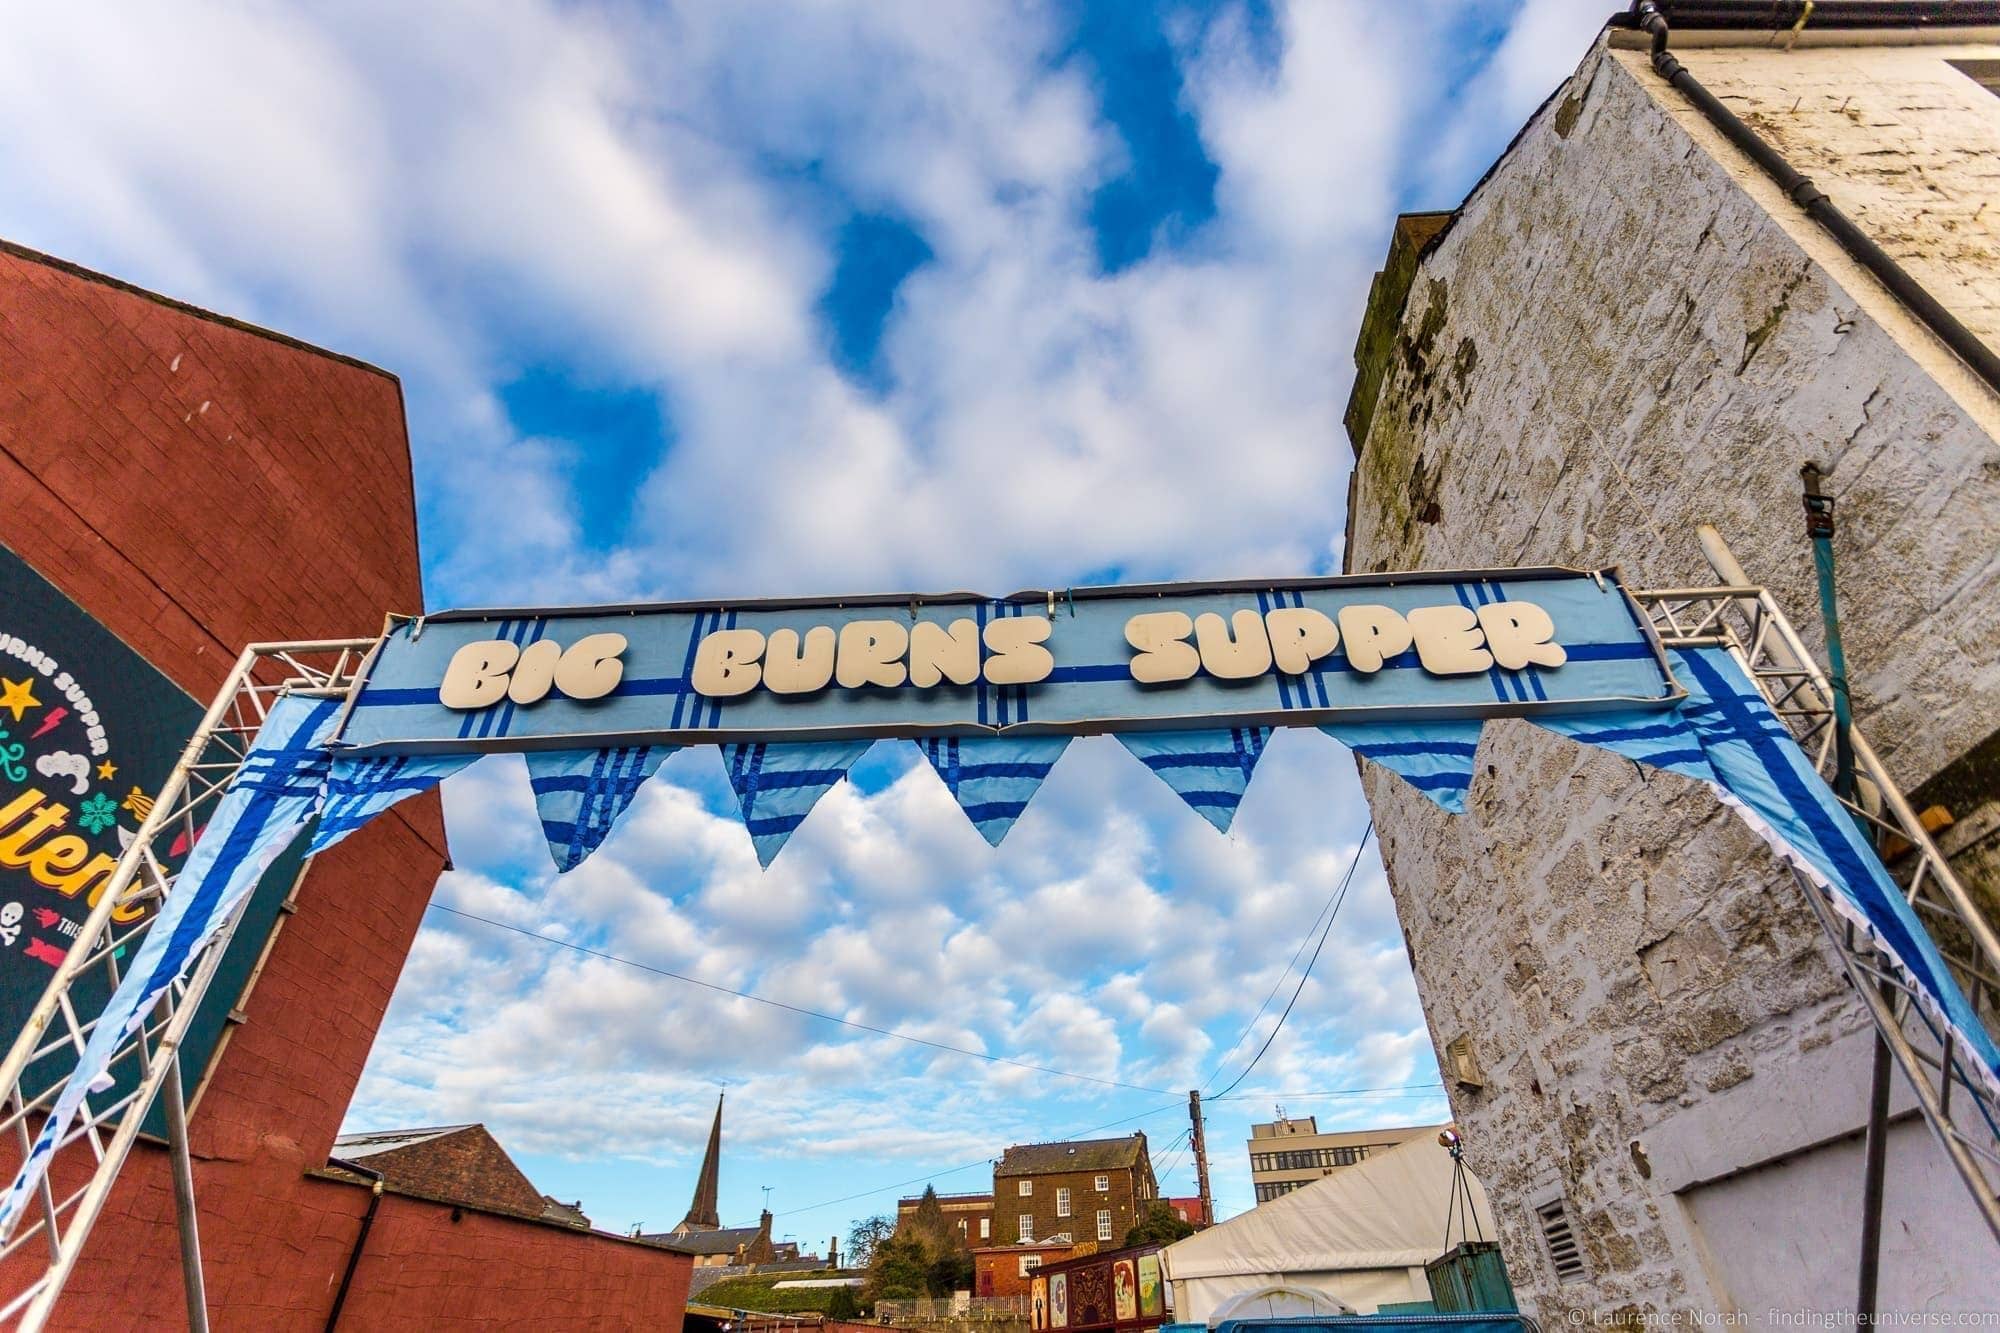 The Dumfries Big Burns Supper Festival - Guide to Visiting